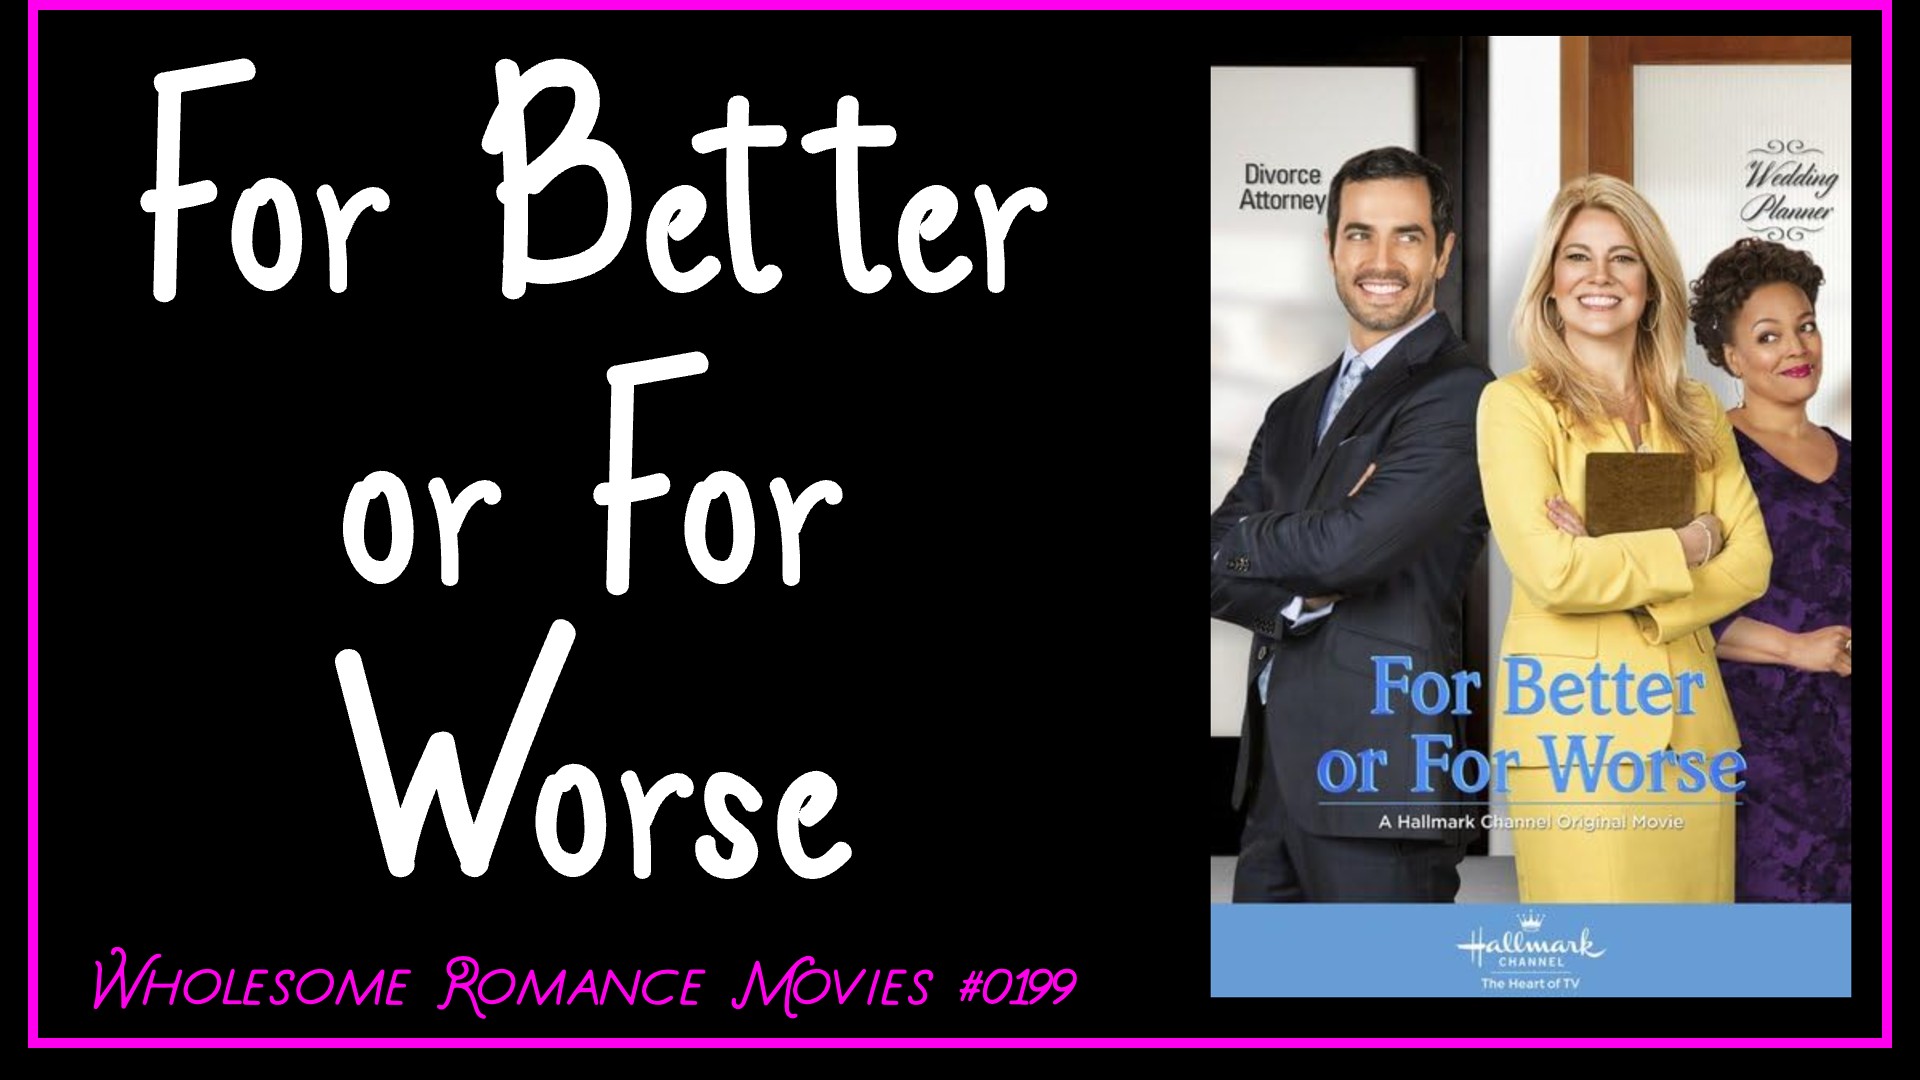 For Better or For Worse (2014) WRM Review